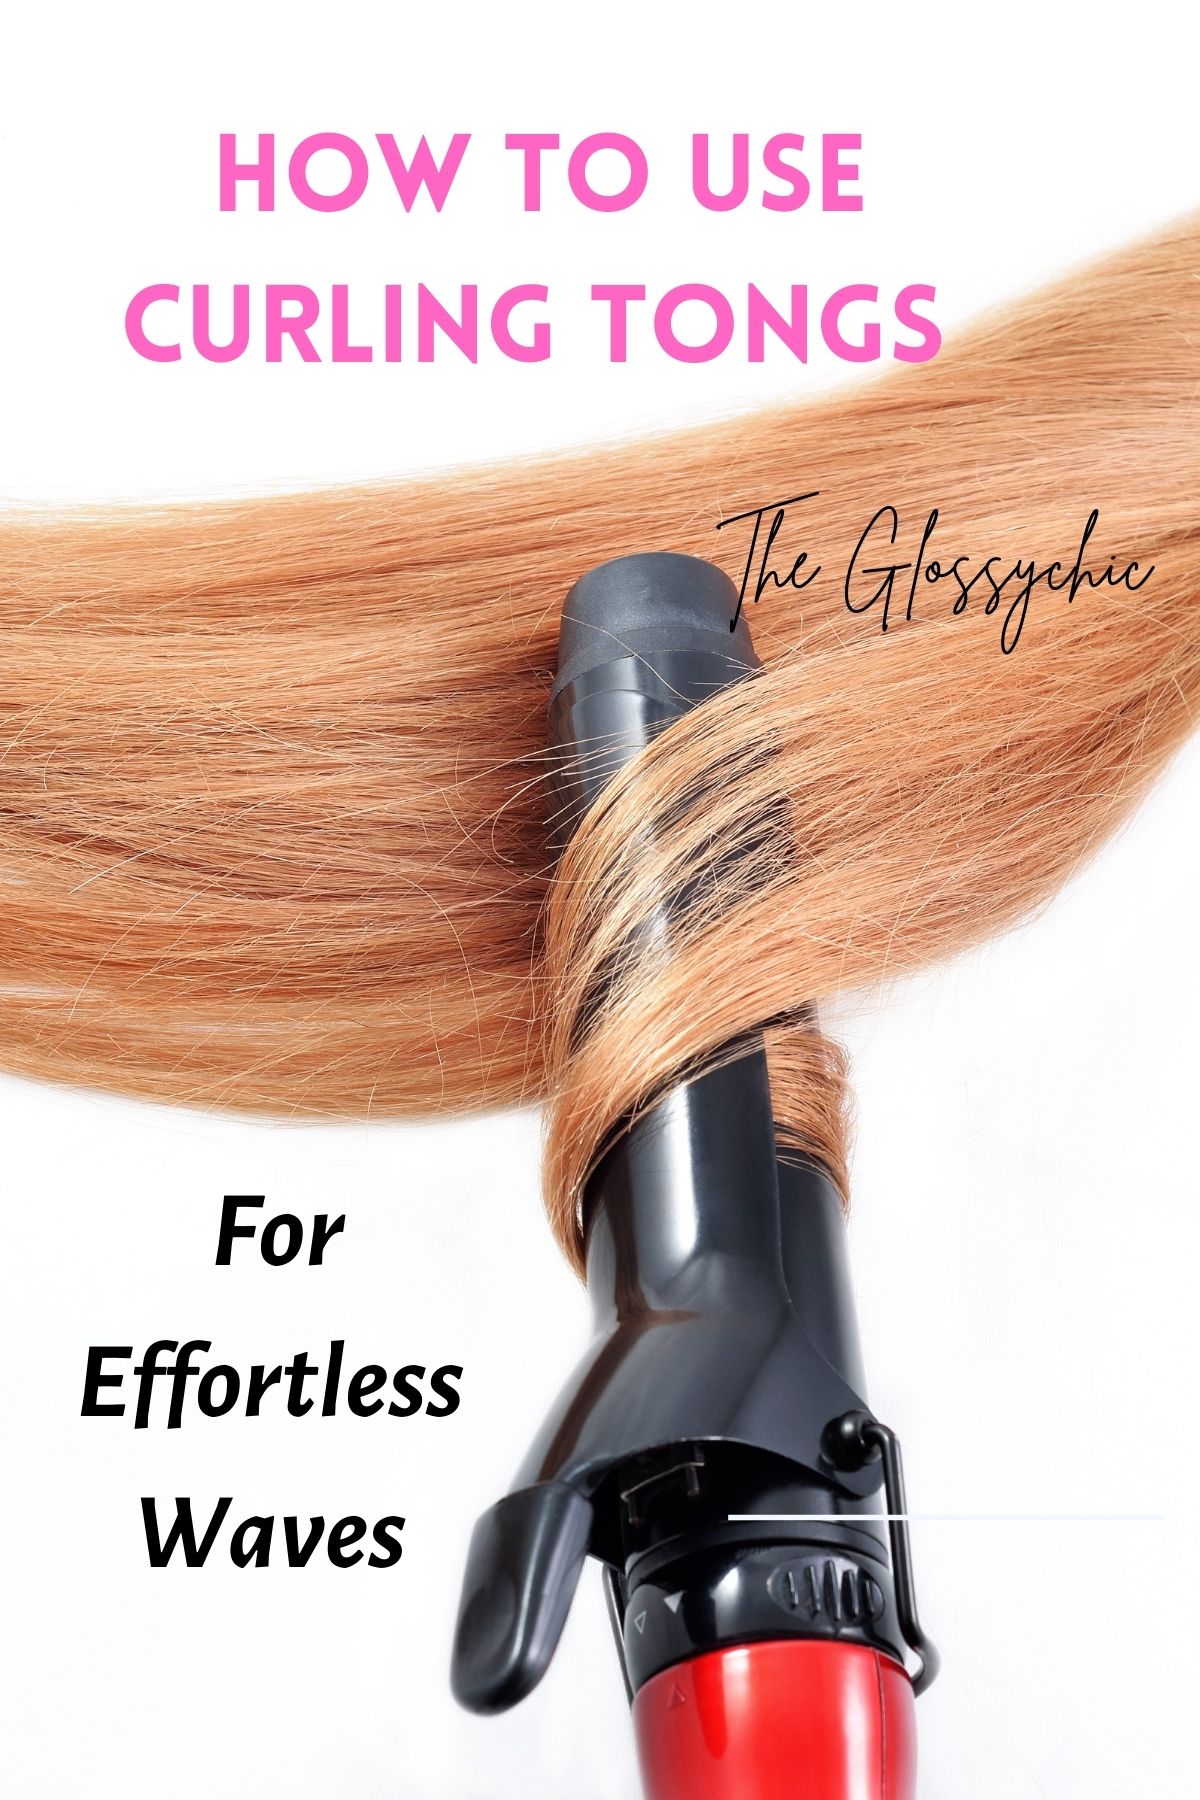 How to use curling tongs